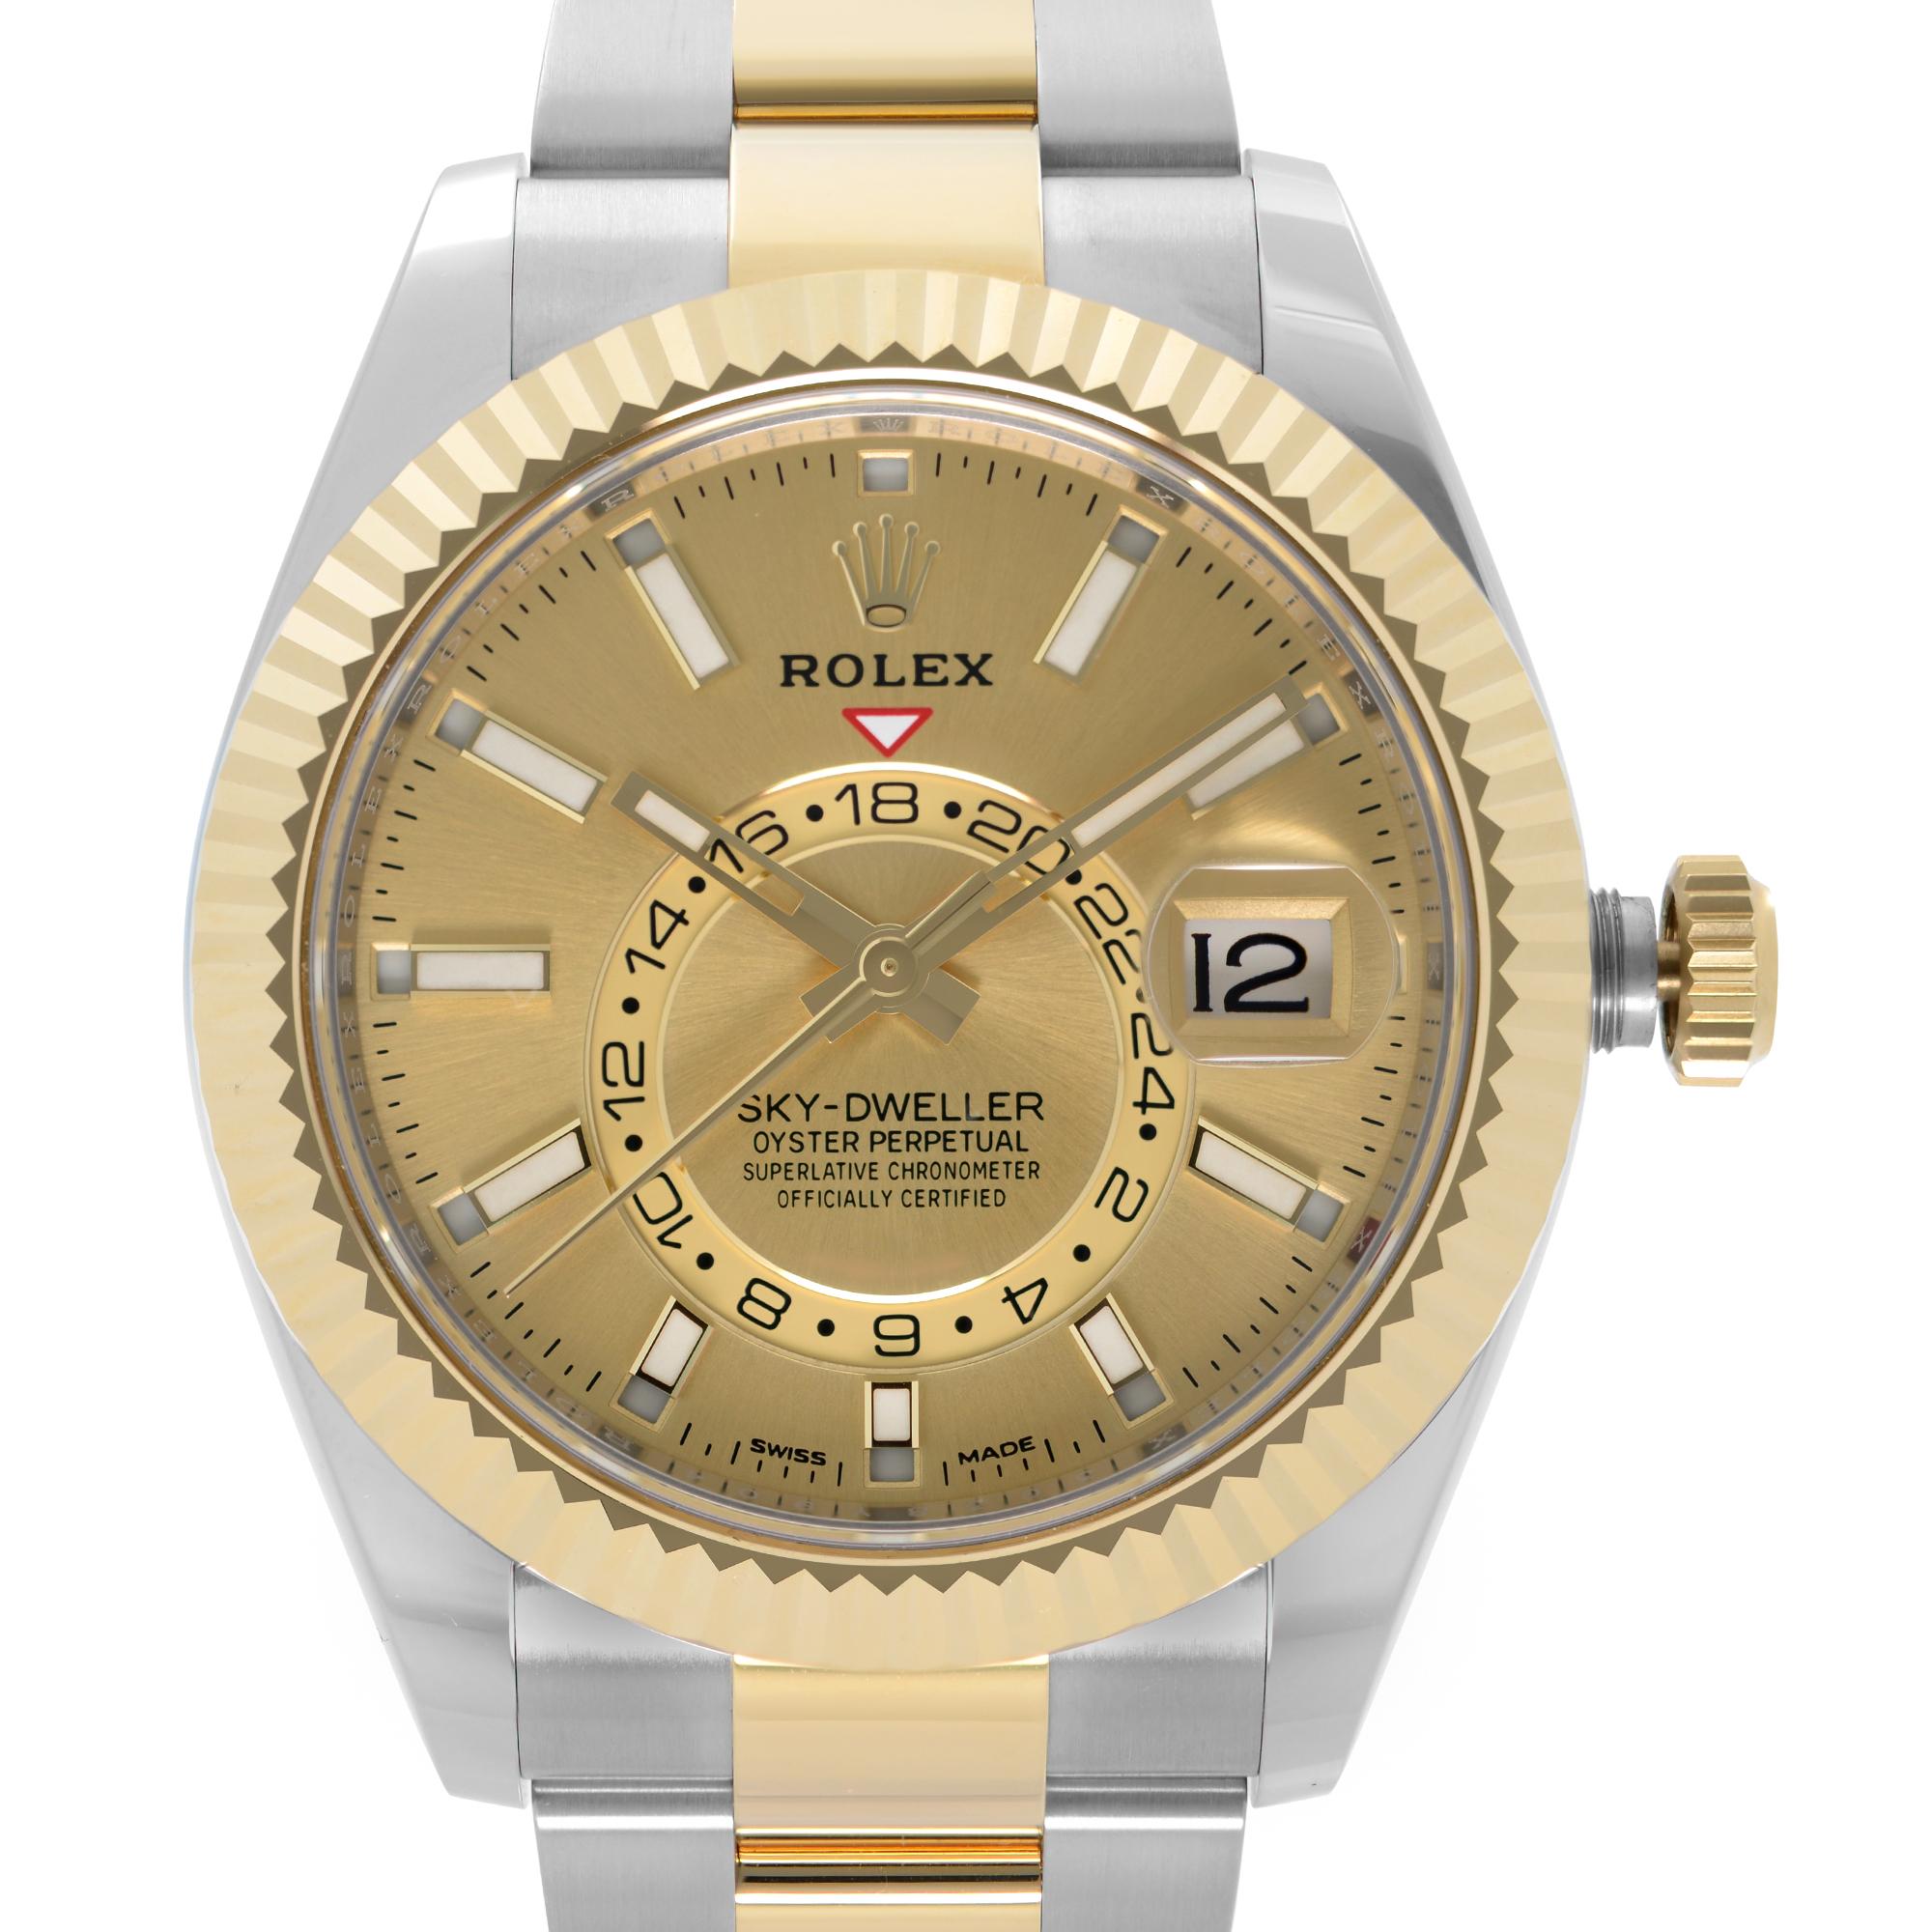 Display Model Rolex Sky-Dweller Yellow Gold Steel Champagne Dial Automatic Men's Watch 326933. 2021 Card. This Beautiful Timepiece Features: Stainless Steel Case with a Stainless Steel & Gold Oyster Bracelet. Fixes Gold Fluted Bezel. Champagne Dial